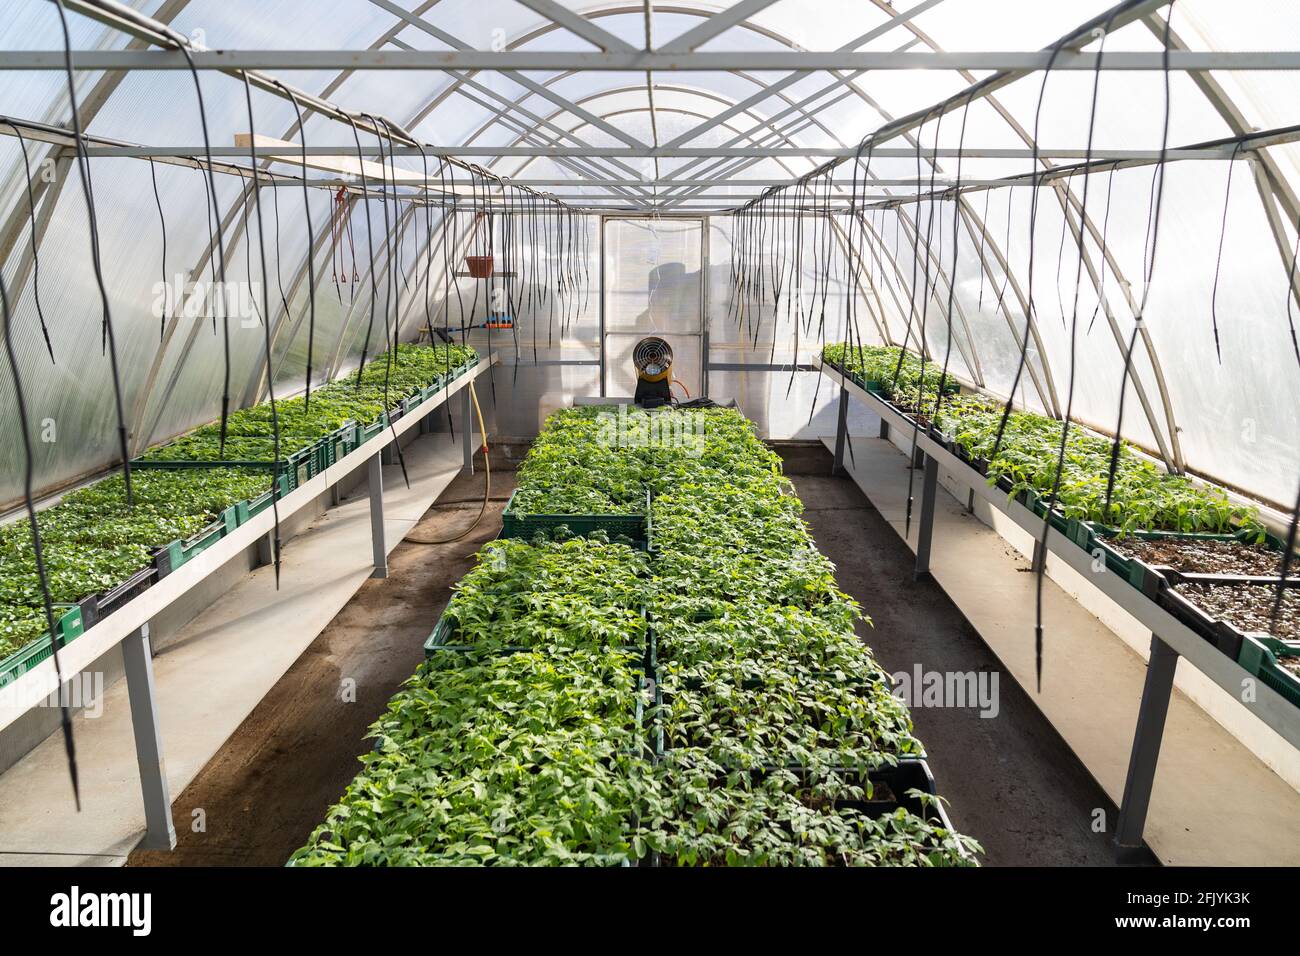 Greenhouse business: vegetables seedling in plant nursery. Tomatoes growing in glasshouse for market Stock Photo